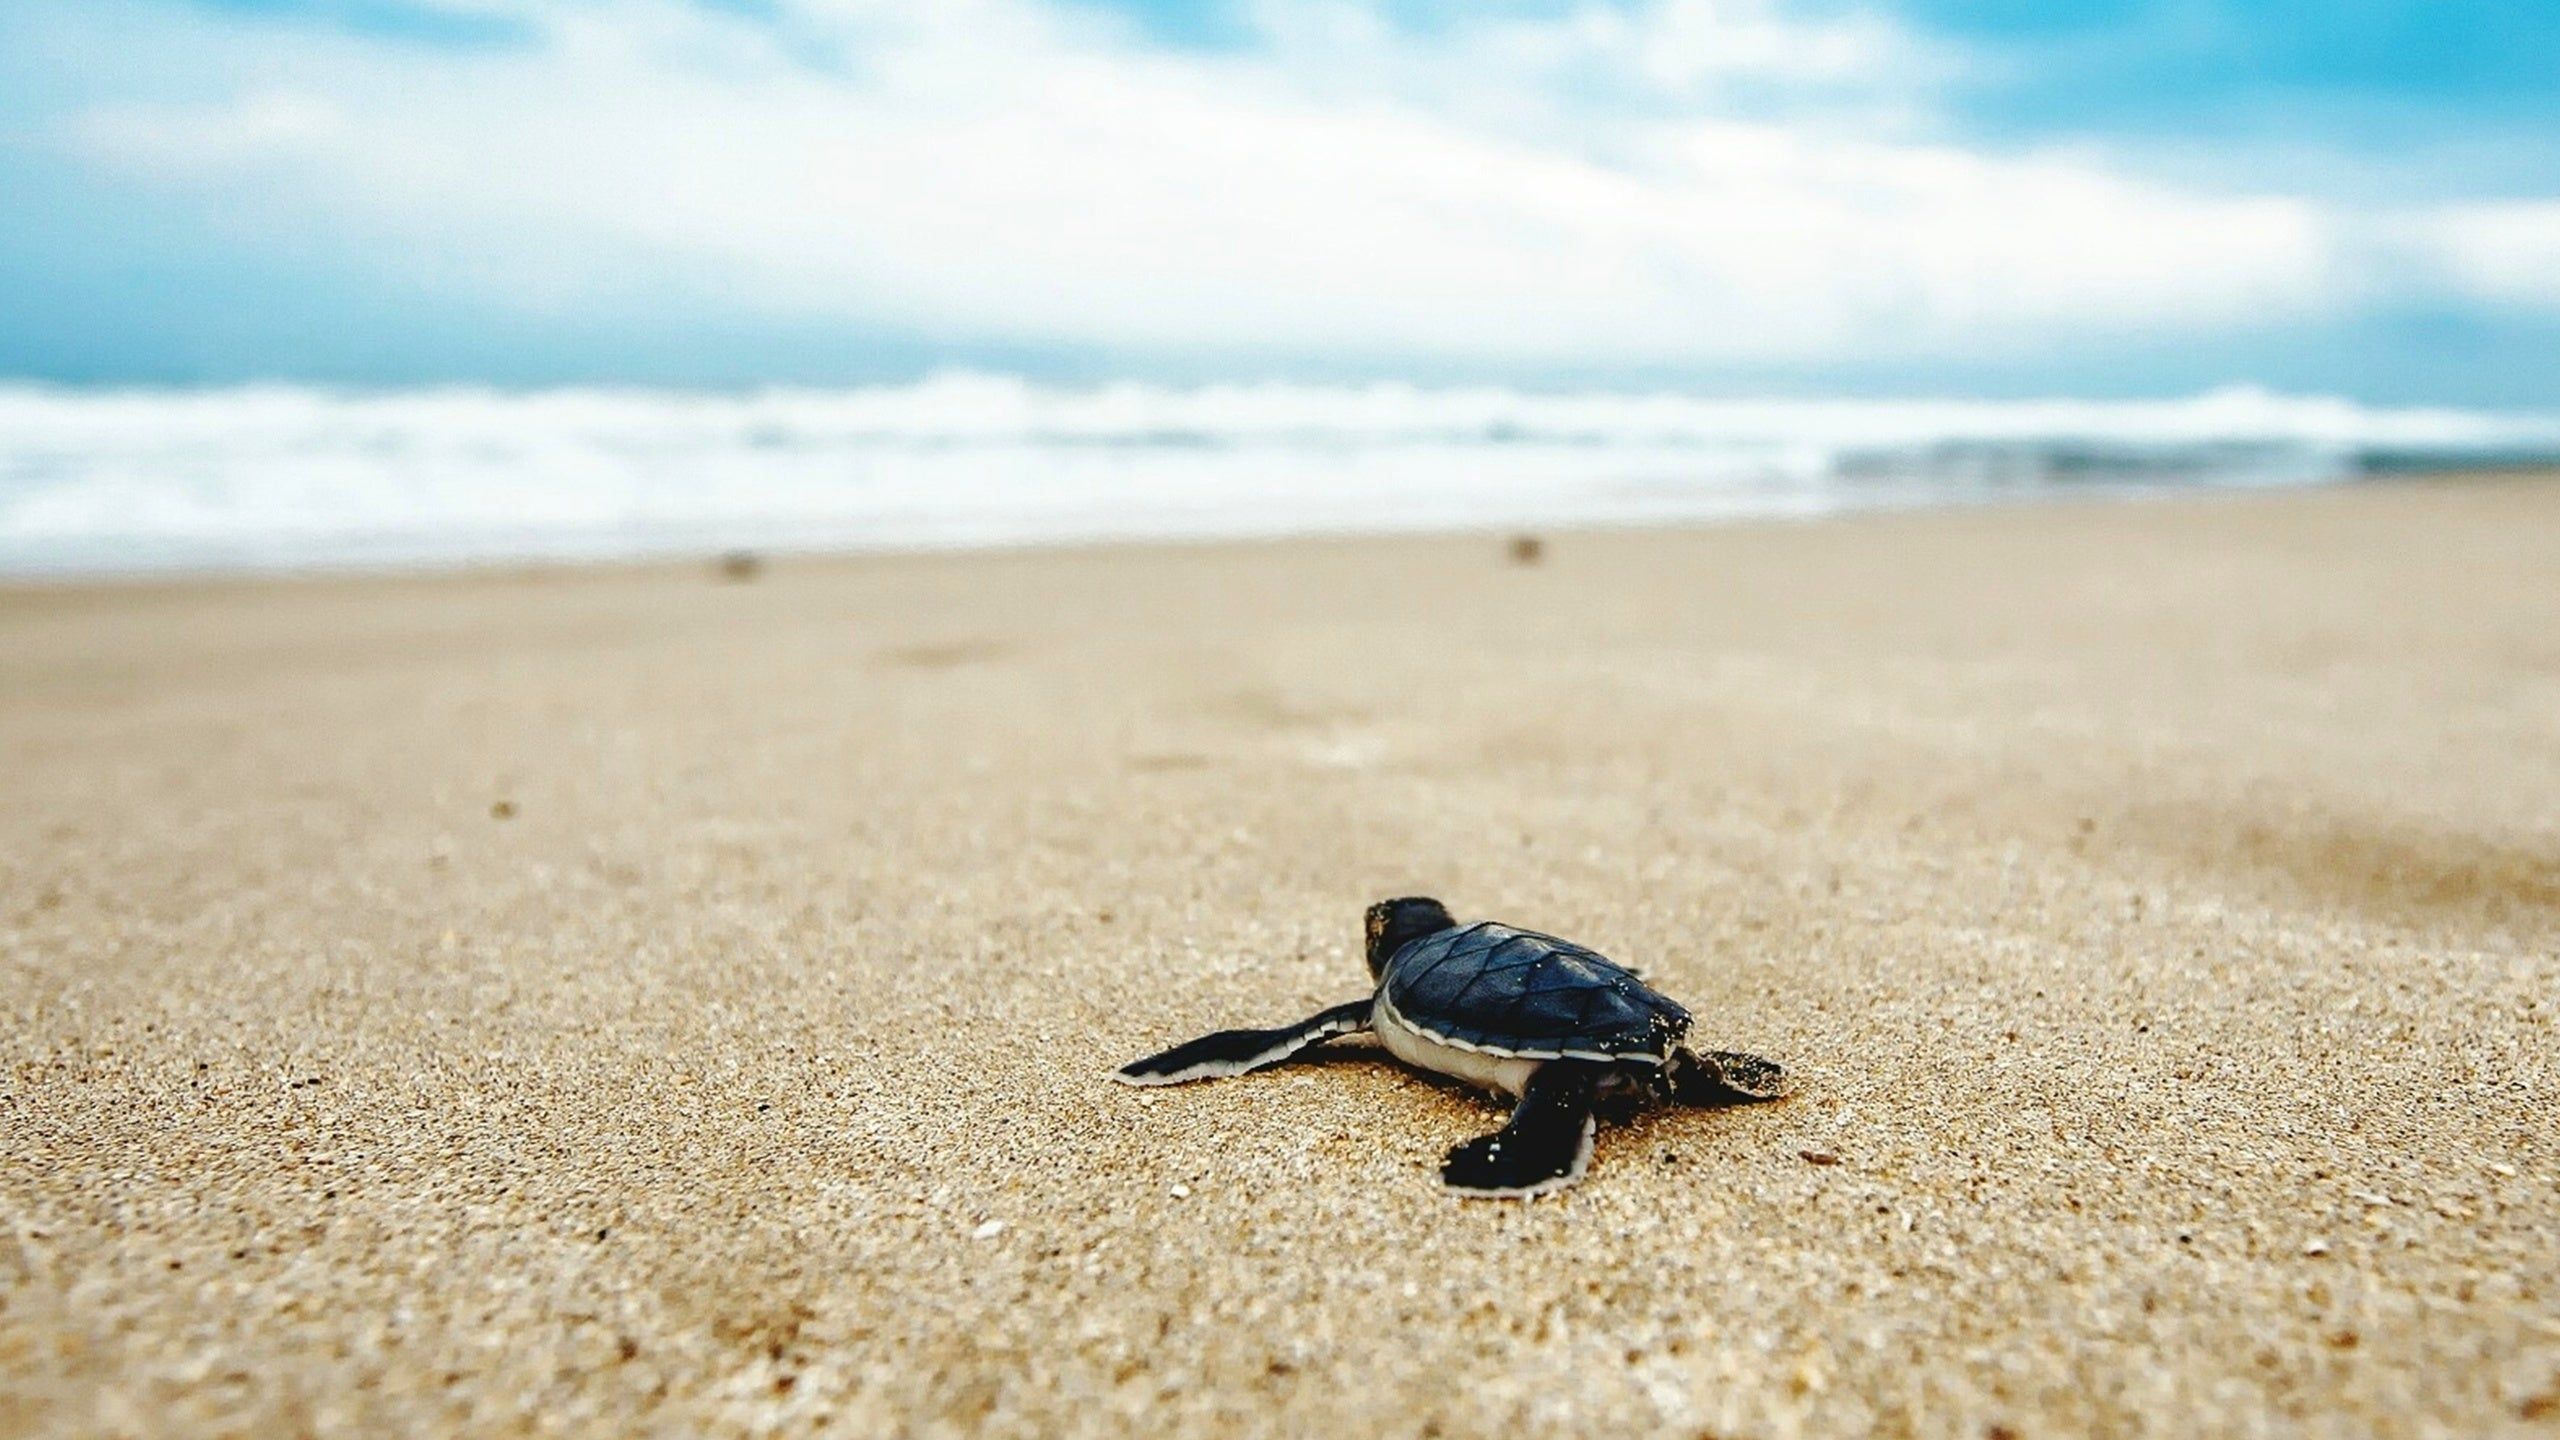 Turtle 4K wallpaper for your desktop or mobile screen free and easy to download